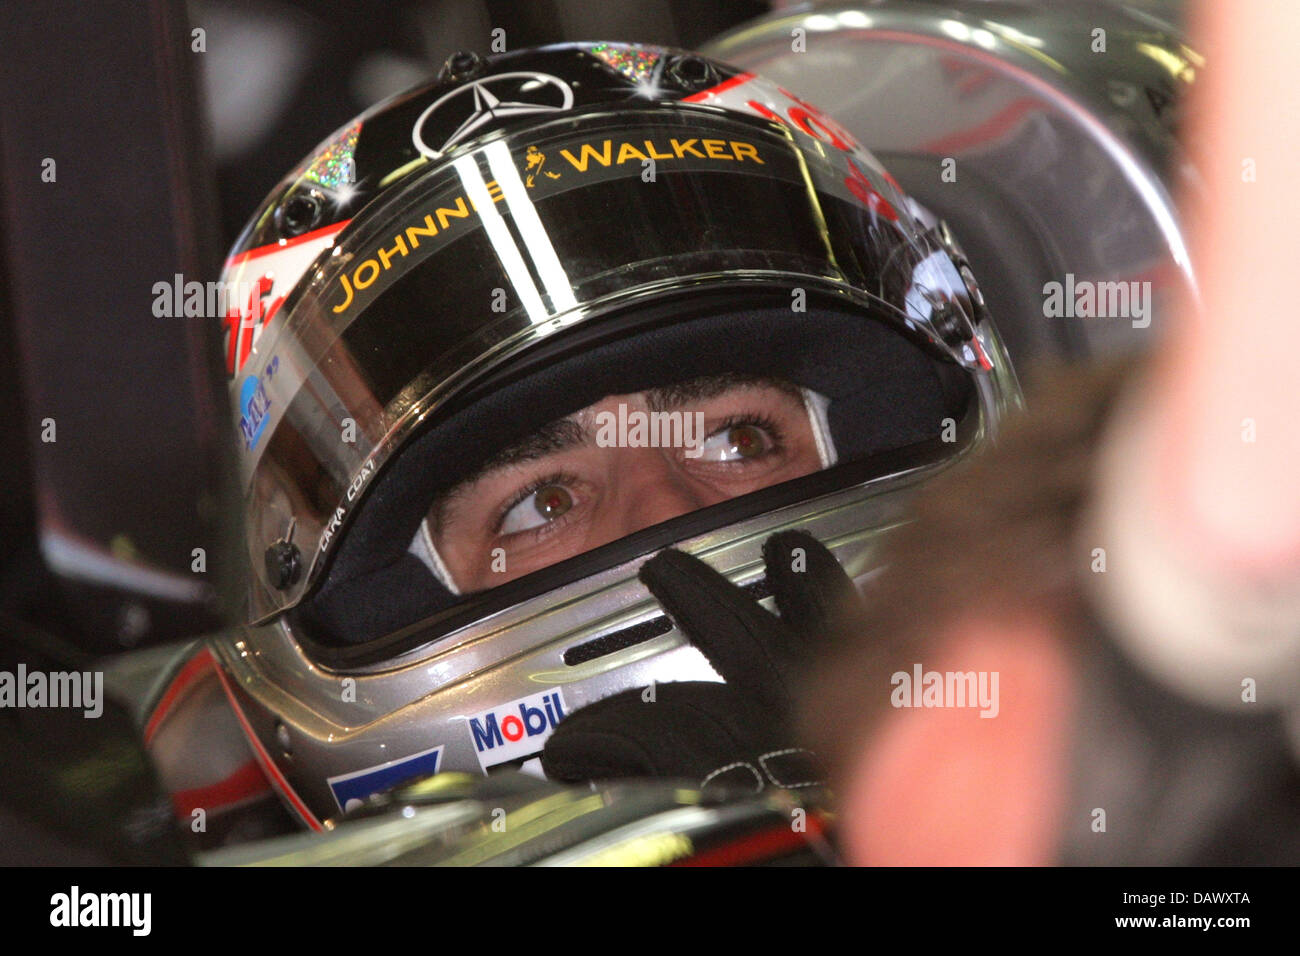 Spanish Formula One pilot Fernando Alonso of McLaren Mercedes sits in his car during the third practice session at the Circuit de Catalunya race track near Barcelona, Spain, 12 May 2007. The 2007 Formula 1 Grand Prix of Spain takes place on 13 May. Photo: Jens Buettner Stock Photo